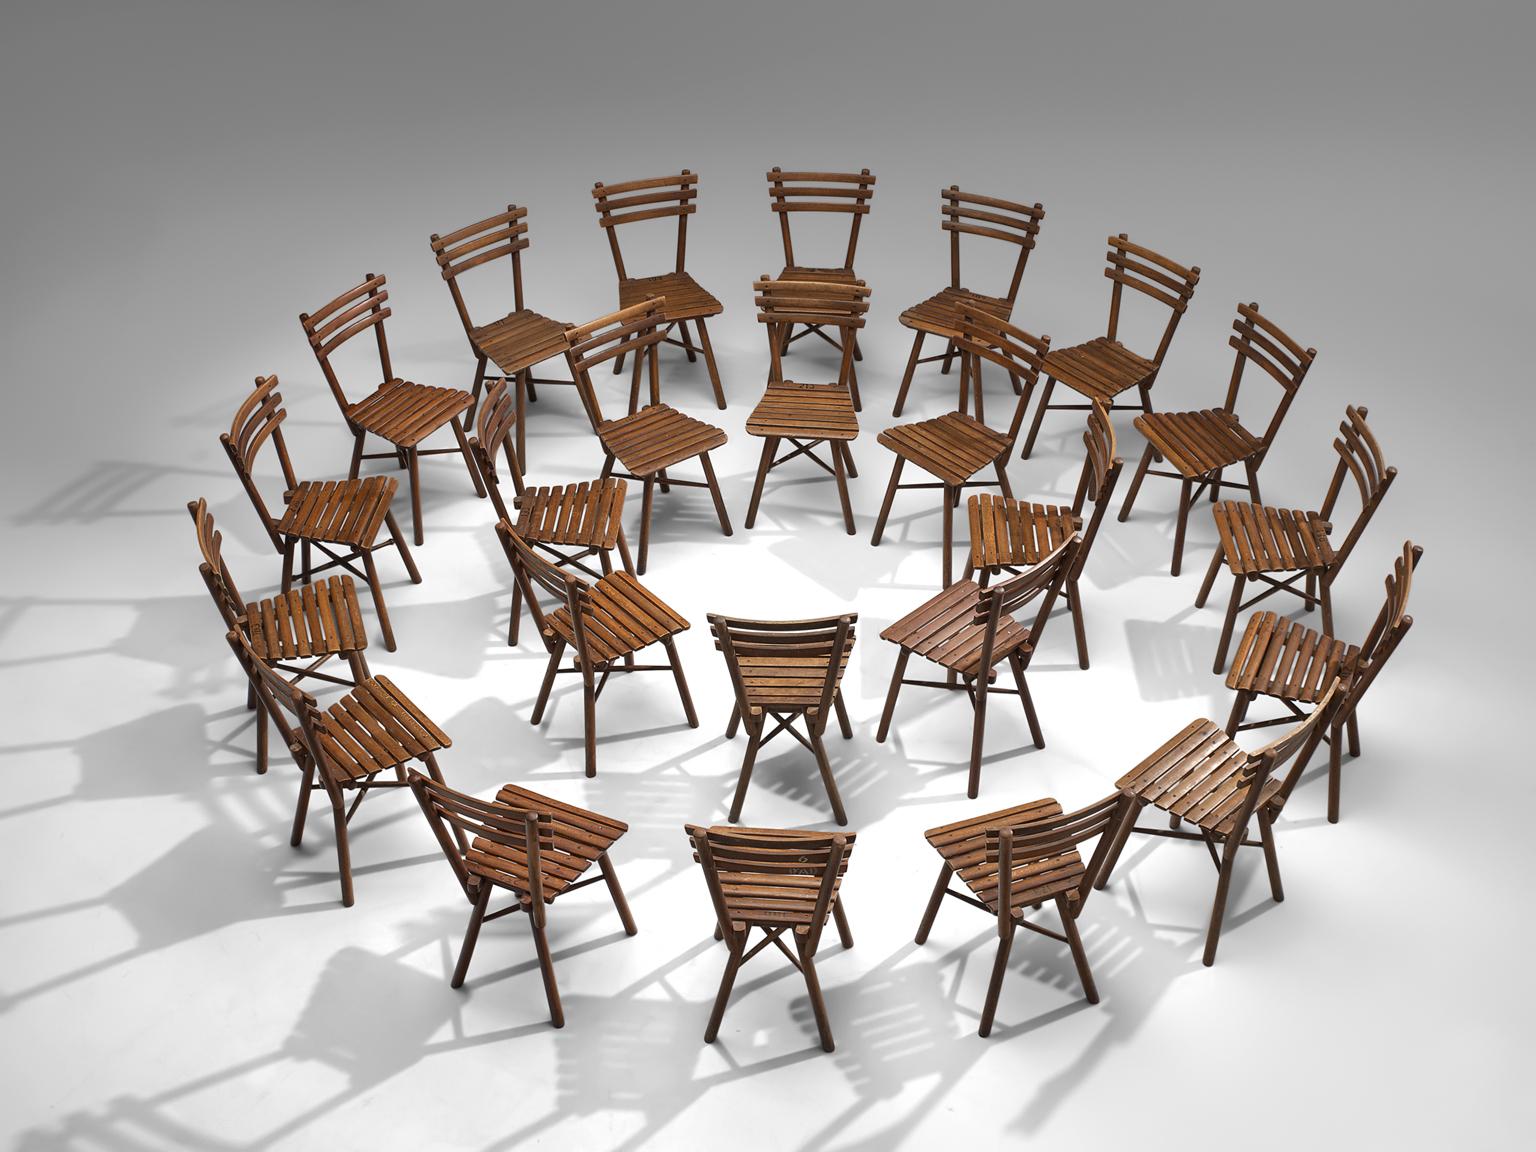 Set of twenty-four Thonet garden chairs in beech by, J. &;J. Kohn 'Nr. 4', circa 1910.

This large set of Thonet chairs are executed by J.&J. Kohn. These chairs have slats as their main feature and their legs are connected with a crossed base.